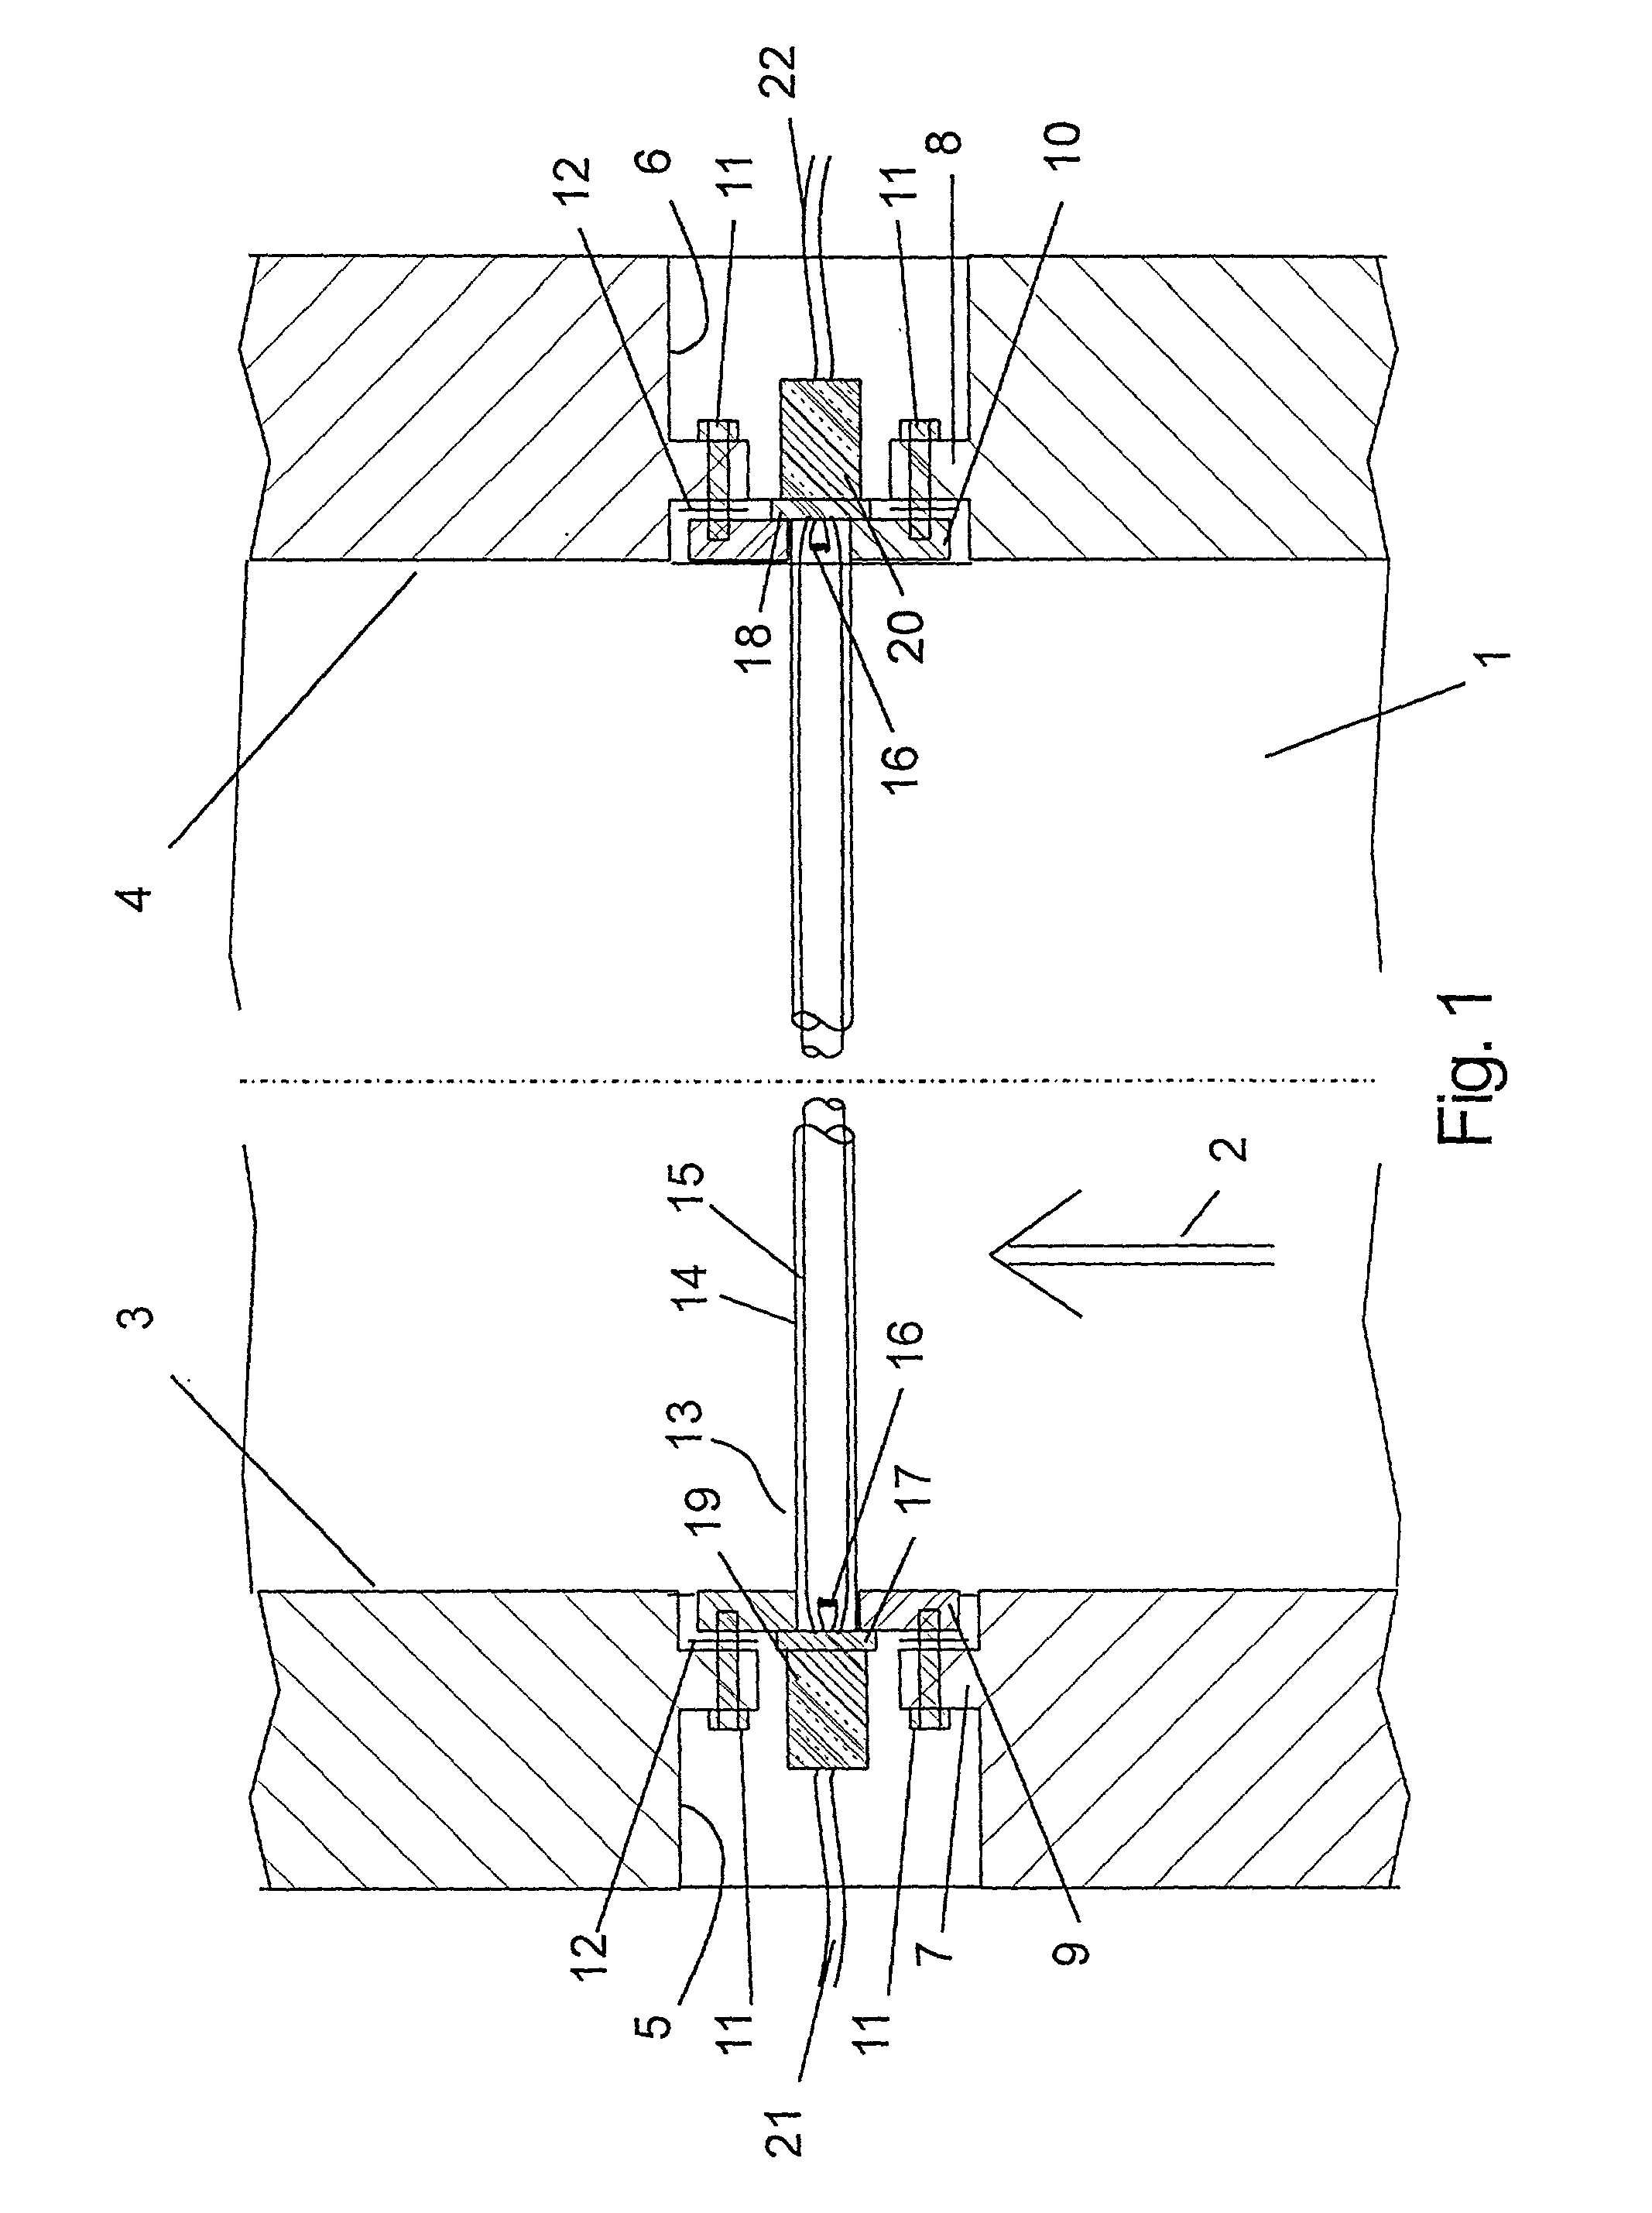 UV radiation device for treating fluids with a simplified radiation chamber